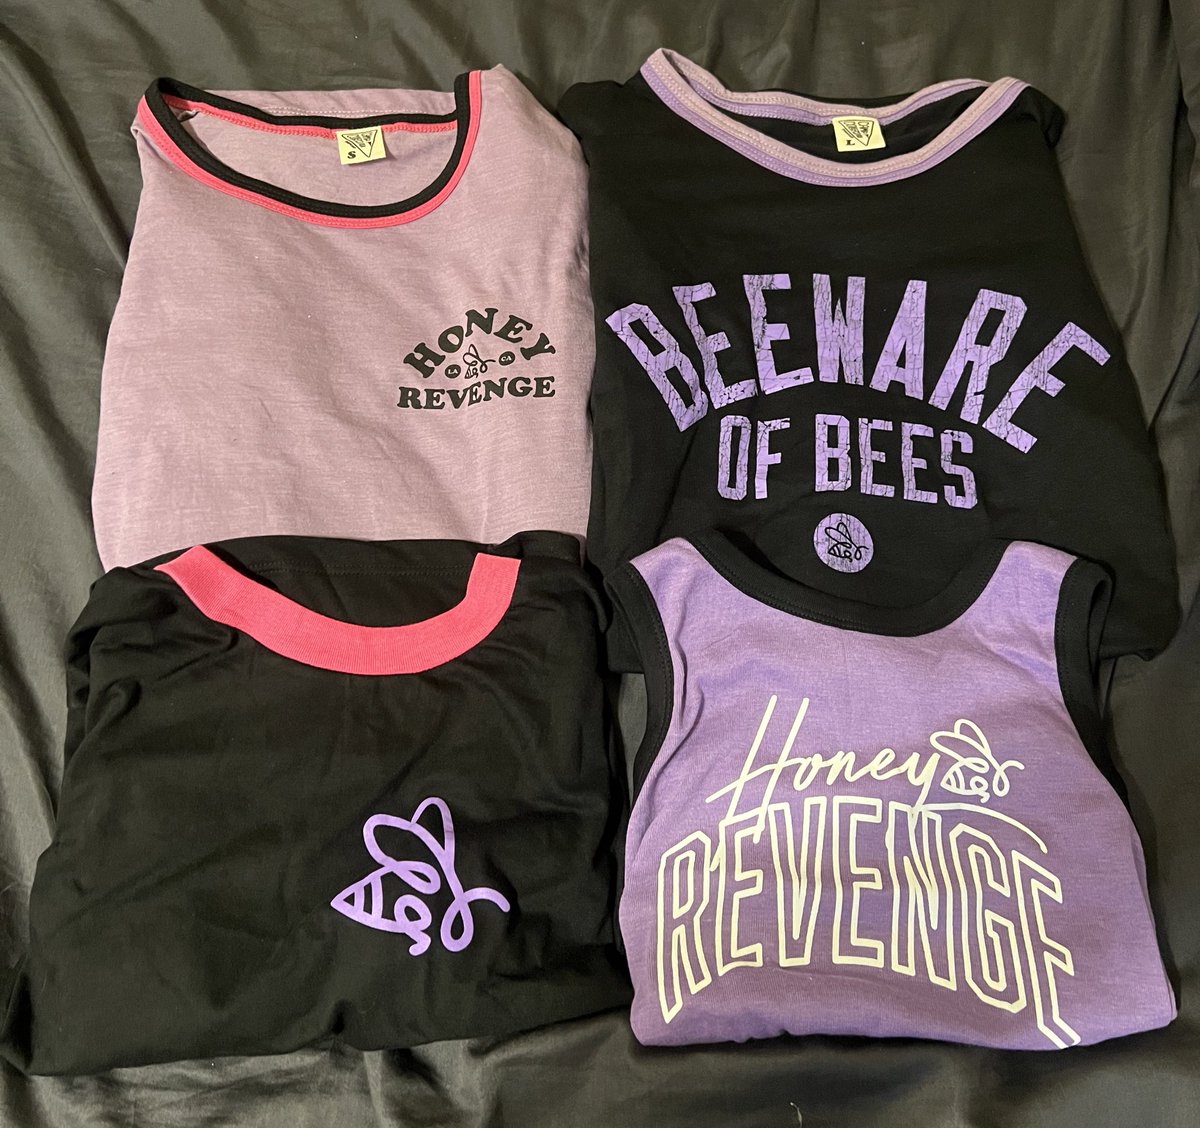 y’all the @honeyrevengeca merch i ordered has arrived and it’s SO CUTE